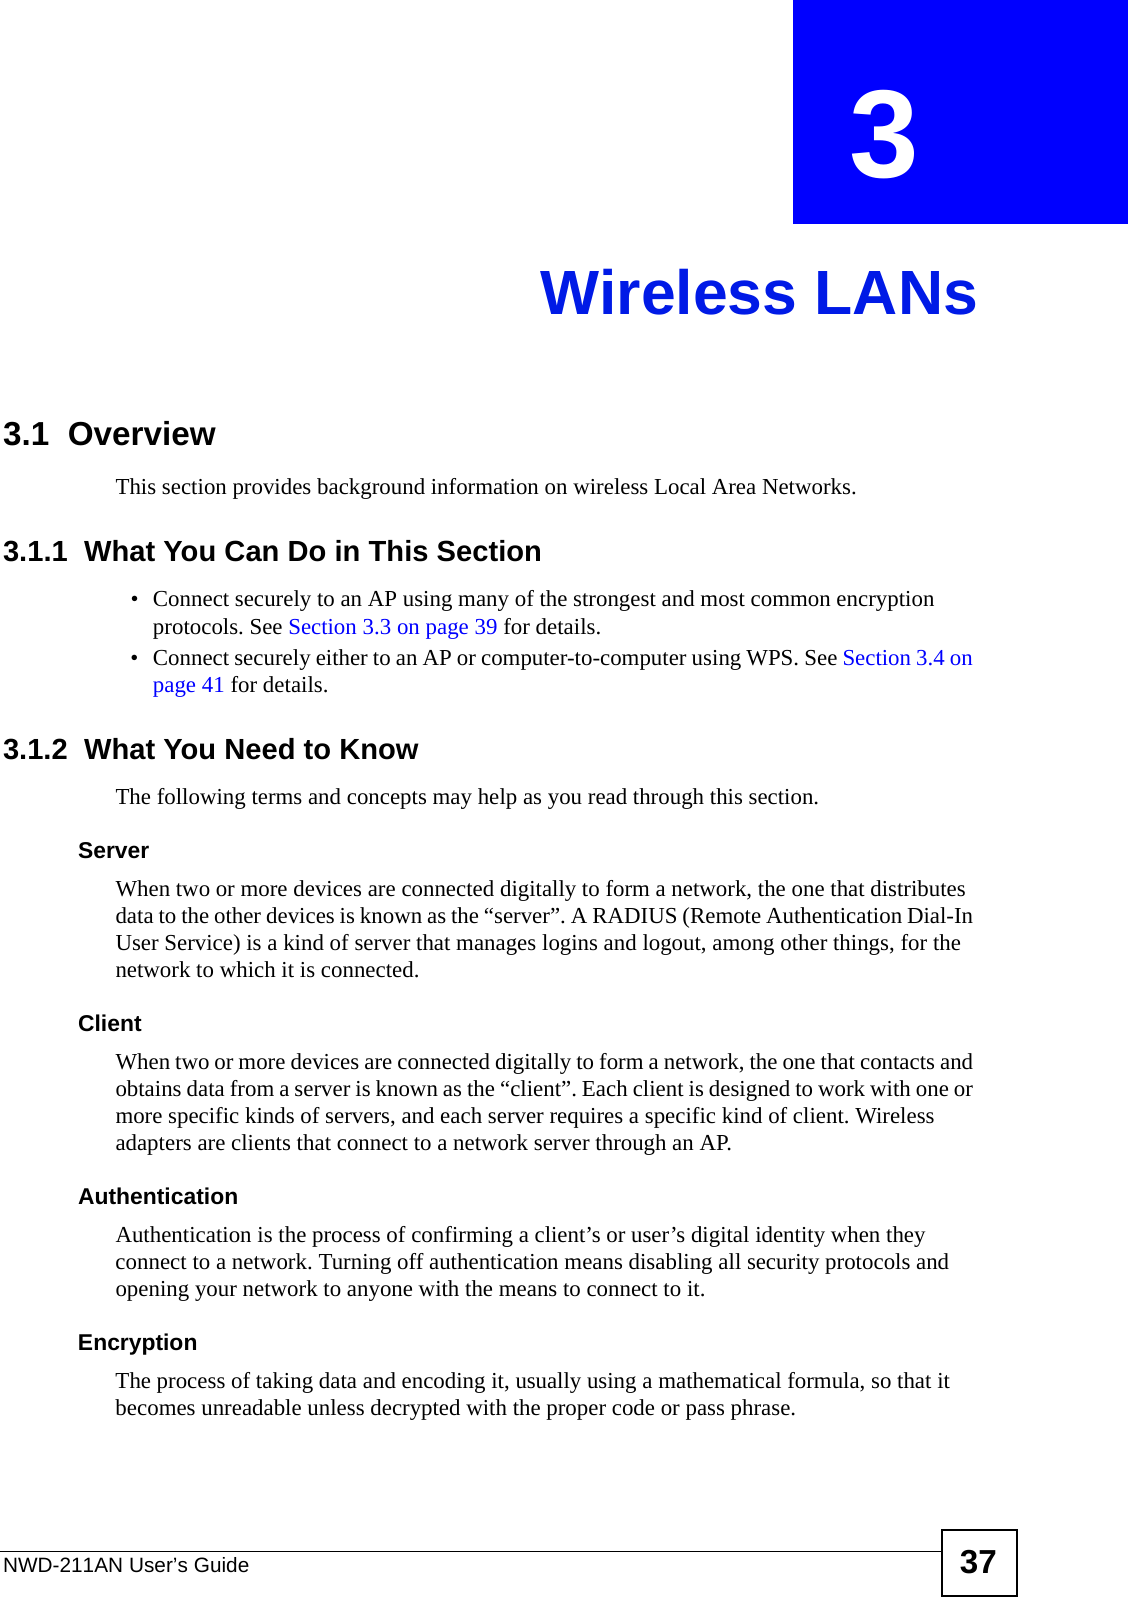 NWD-211AN User’s Guide 37CHAPTER  3 Wireless LANs3.1  OverviewThis section provides background information on wireless Local Area Networks.3.1.1  What You Can Do in This Section• Connect securely to an AP using many of the strongest and most common encryption protocols. See Section 3.3 on page 39 for details.• Connect securely either to an AP or computer-to-computer using WPS. See Section 3.4 on page 41 for details.3.1.2  What You Need to KnowThe following terms and concepts may help as you read through this section.ServerWhen two or more devices are connected digitally to form a network, the one that distributes data to the other devices is known as the “server”. A RADIUS (Remote Authentication Dial-In User Service) is a kind of server that manages logins and logout, among other things, for the network to which it is connected.ClientWhen two or more devices are connected digitally to form a network, the one that contacts and obtains data from a server is known as the “client”. Each client is designed to work with one or more specific kinds of servers, and each server requires a specific kind of client. Wireless adapters are clients that connect to a network server through an AP.AuthenticationAuthentication is the process of confirming a client’s or user’s digital identity when they connect to a network. Turning off authentication means disabling all security protocols and opening your network to anyone with the means to connect to it.EncryptionThe process of taking data and encoding it, usually using a mathematical formula, so that it becomes unreadable unless decrypted with the proper code or pass phrase.